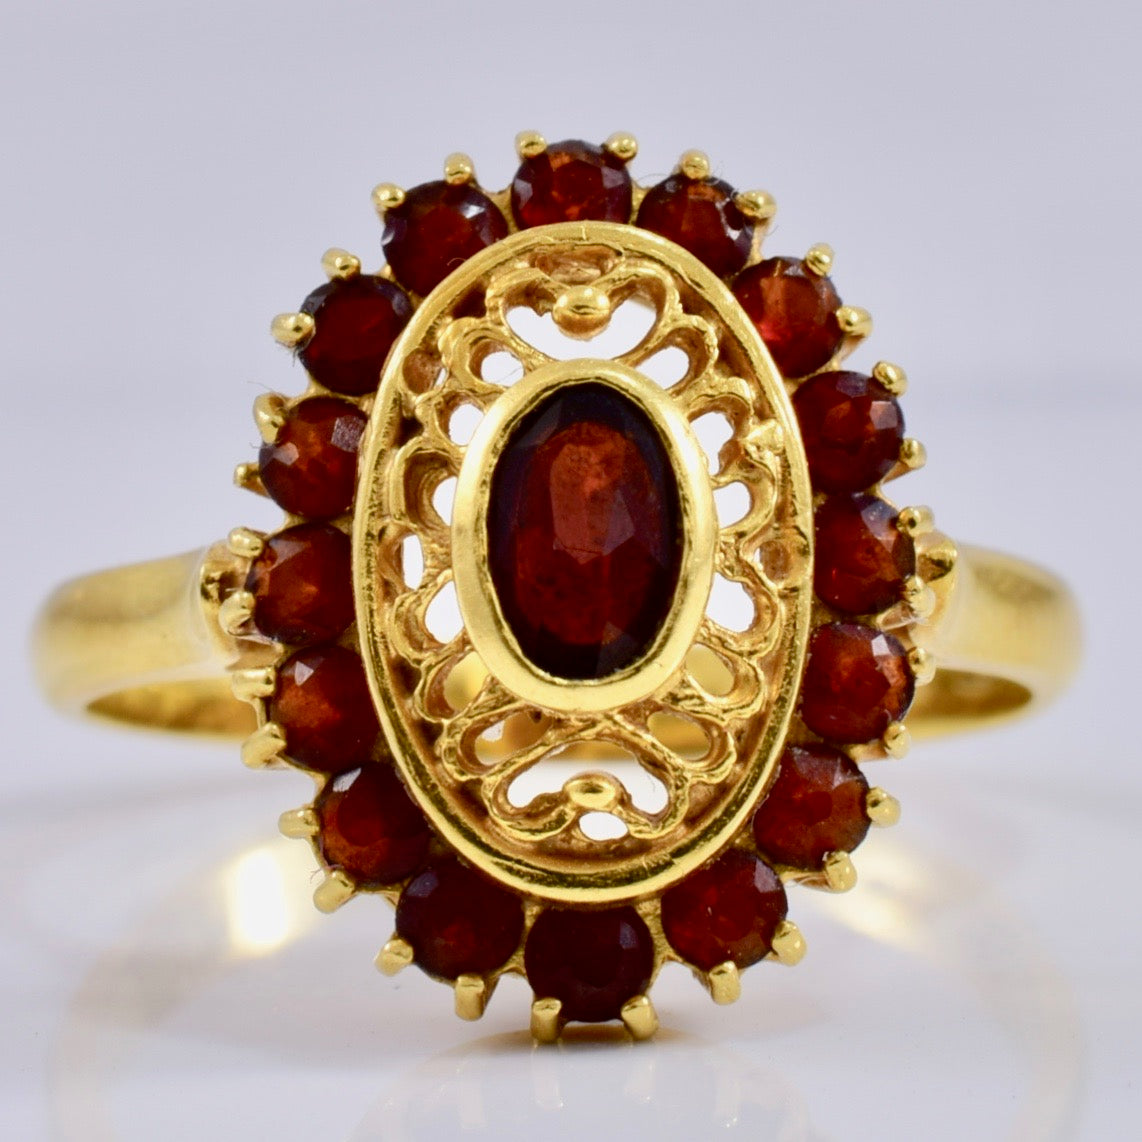 Intricate Gold and Garnet Ring | 0.75 ctw SZ 6.5 |